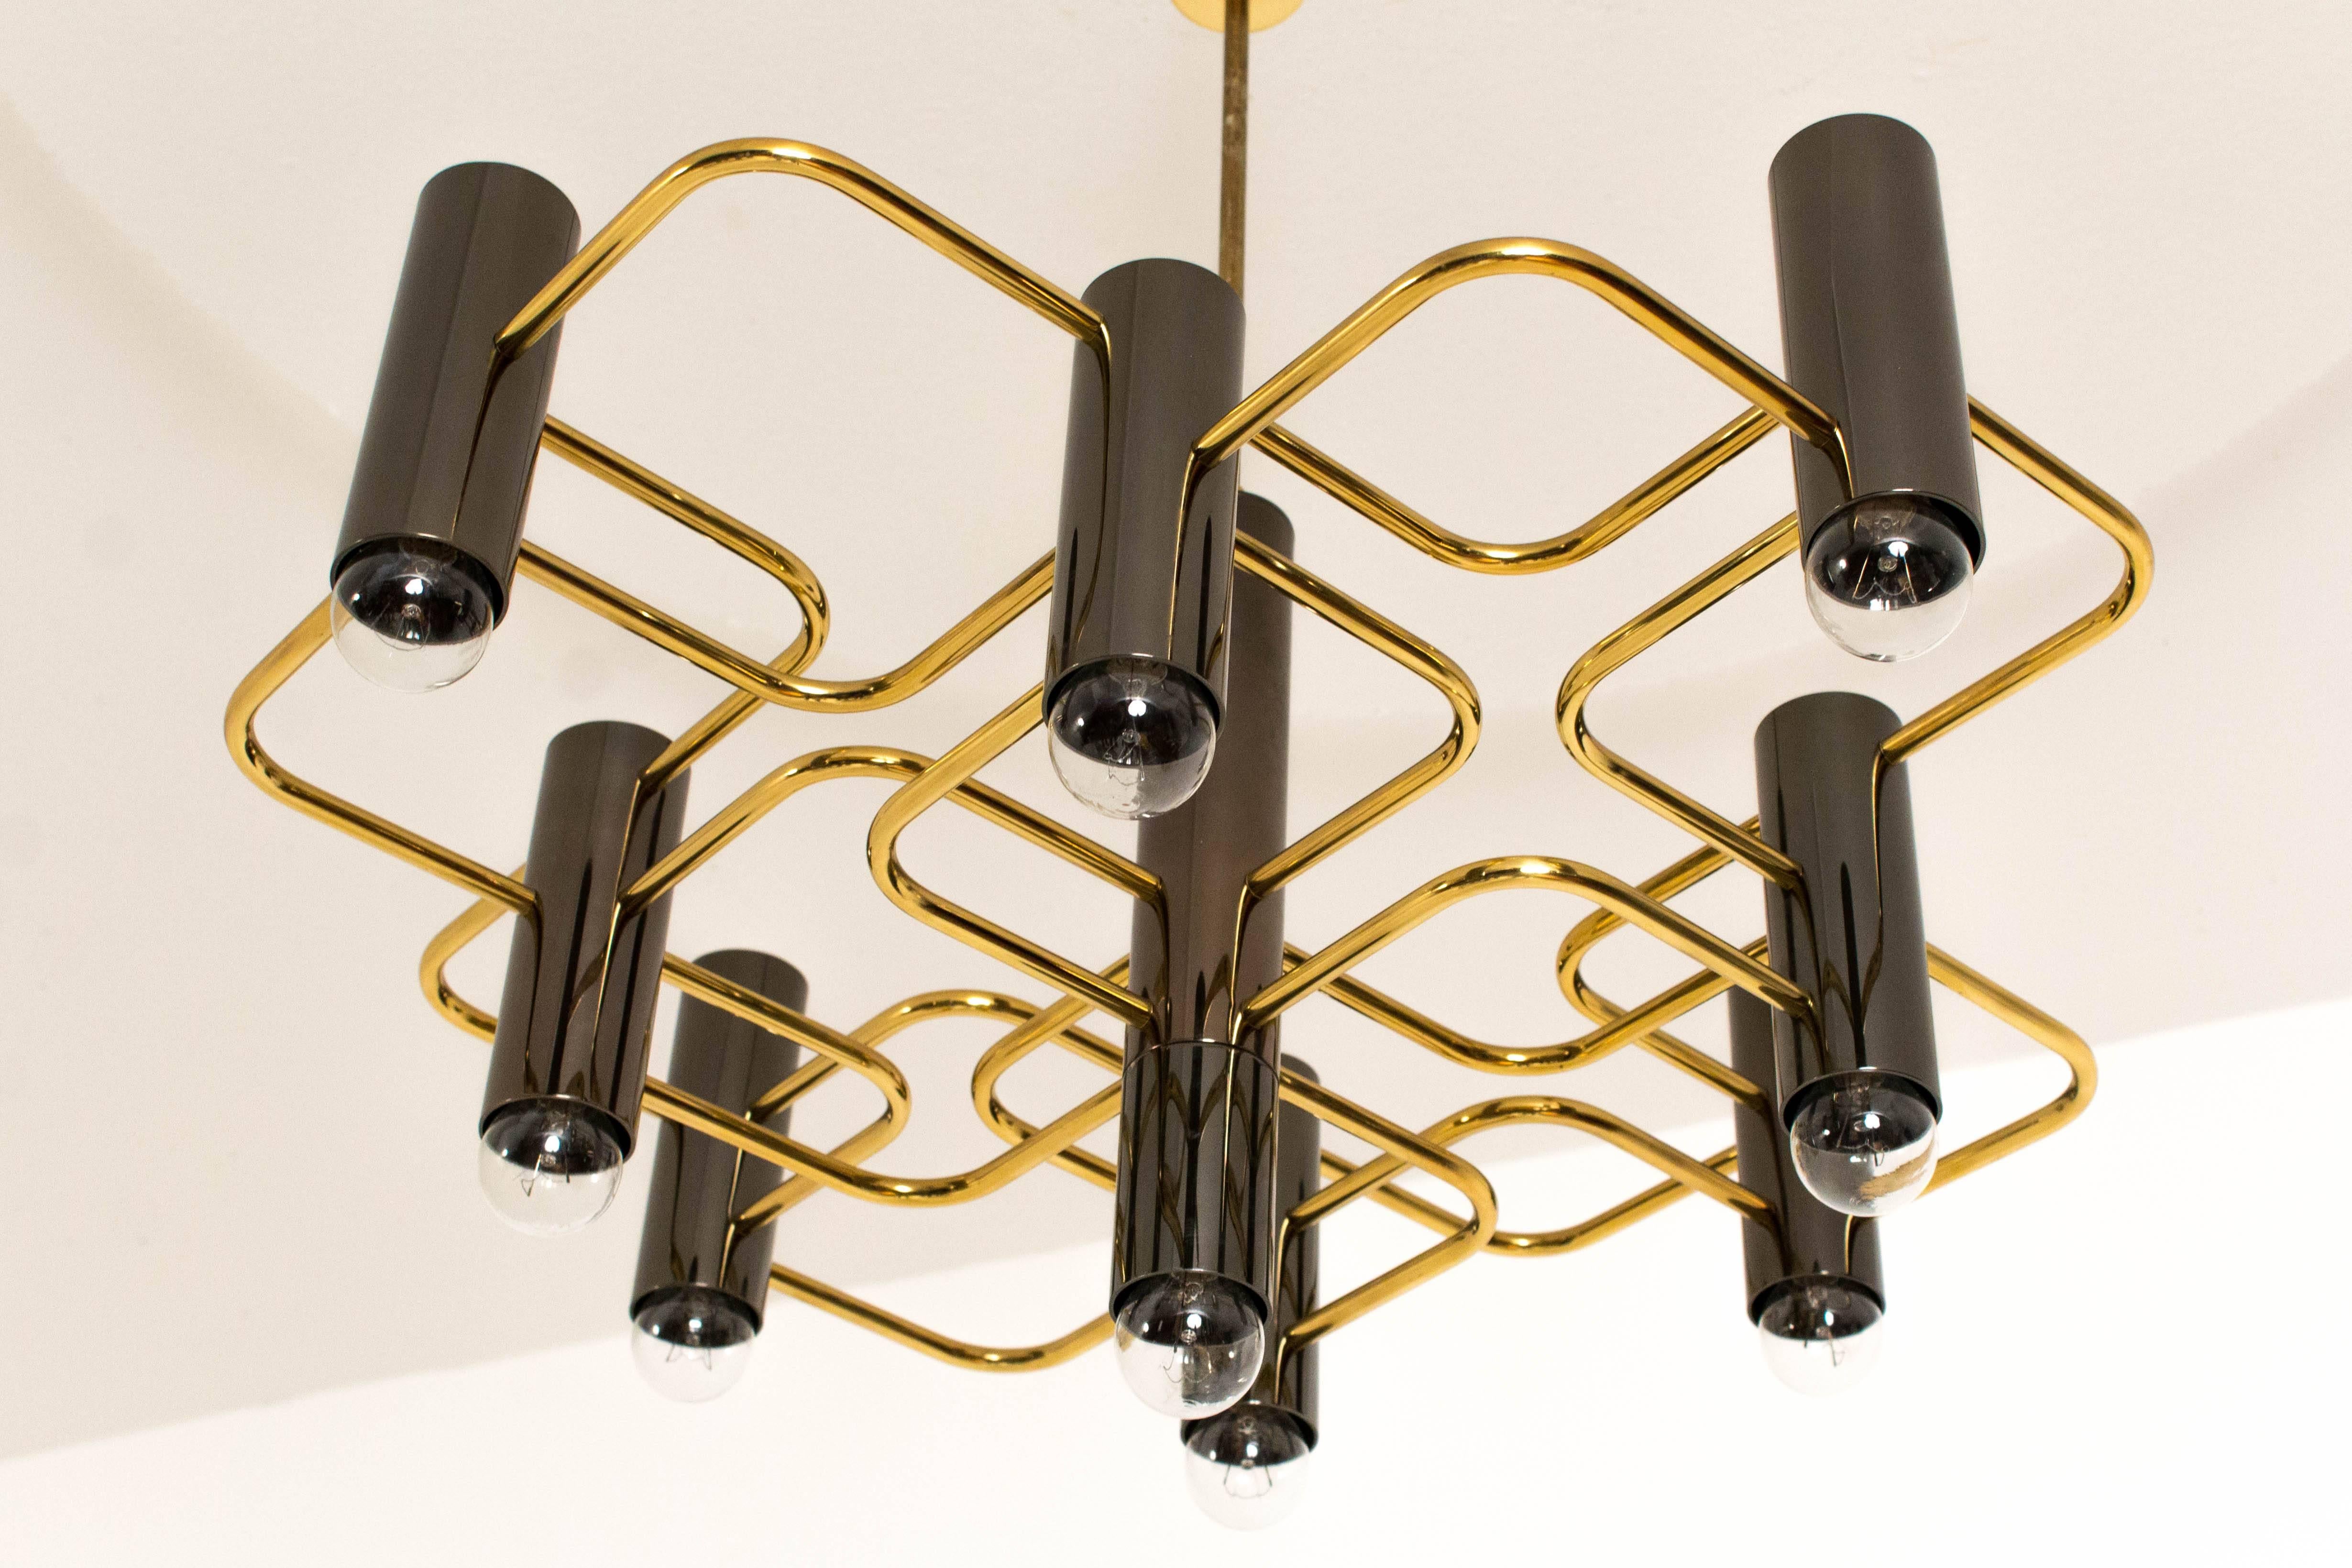 Stunning Mid-Century Modern chandelier by Gaetano Sciolari for Boulanger, 1970s.
This rare version is in brass and black lacquered metal.
In very good condition with minor wear consistent with age and use,
preserving a beautiful patina.